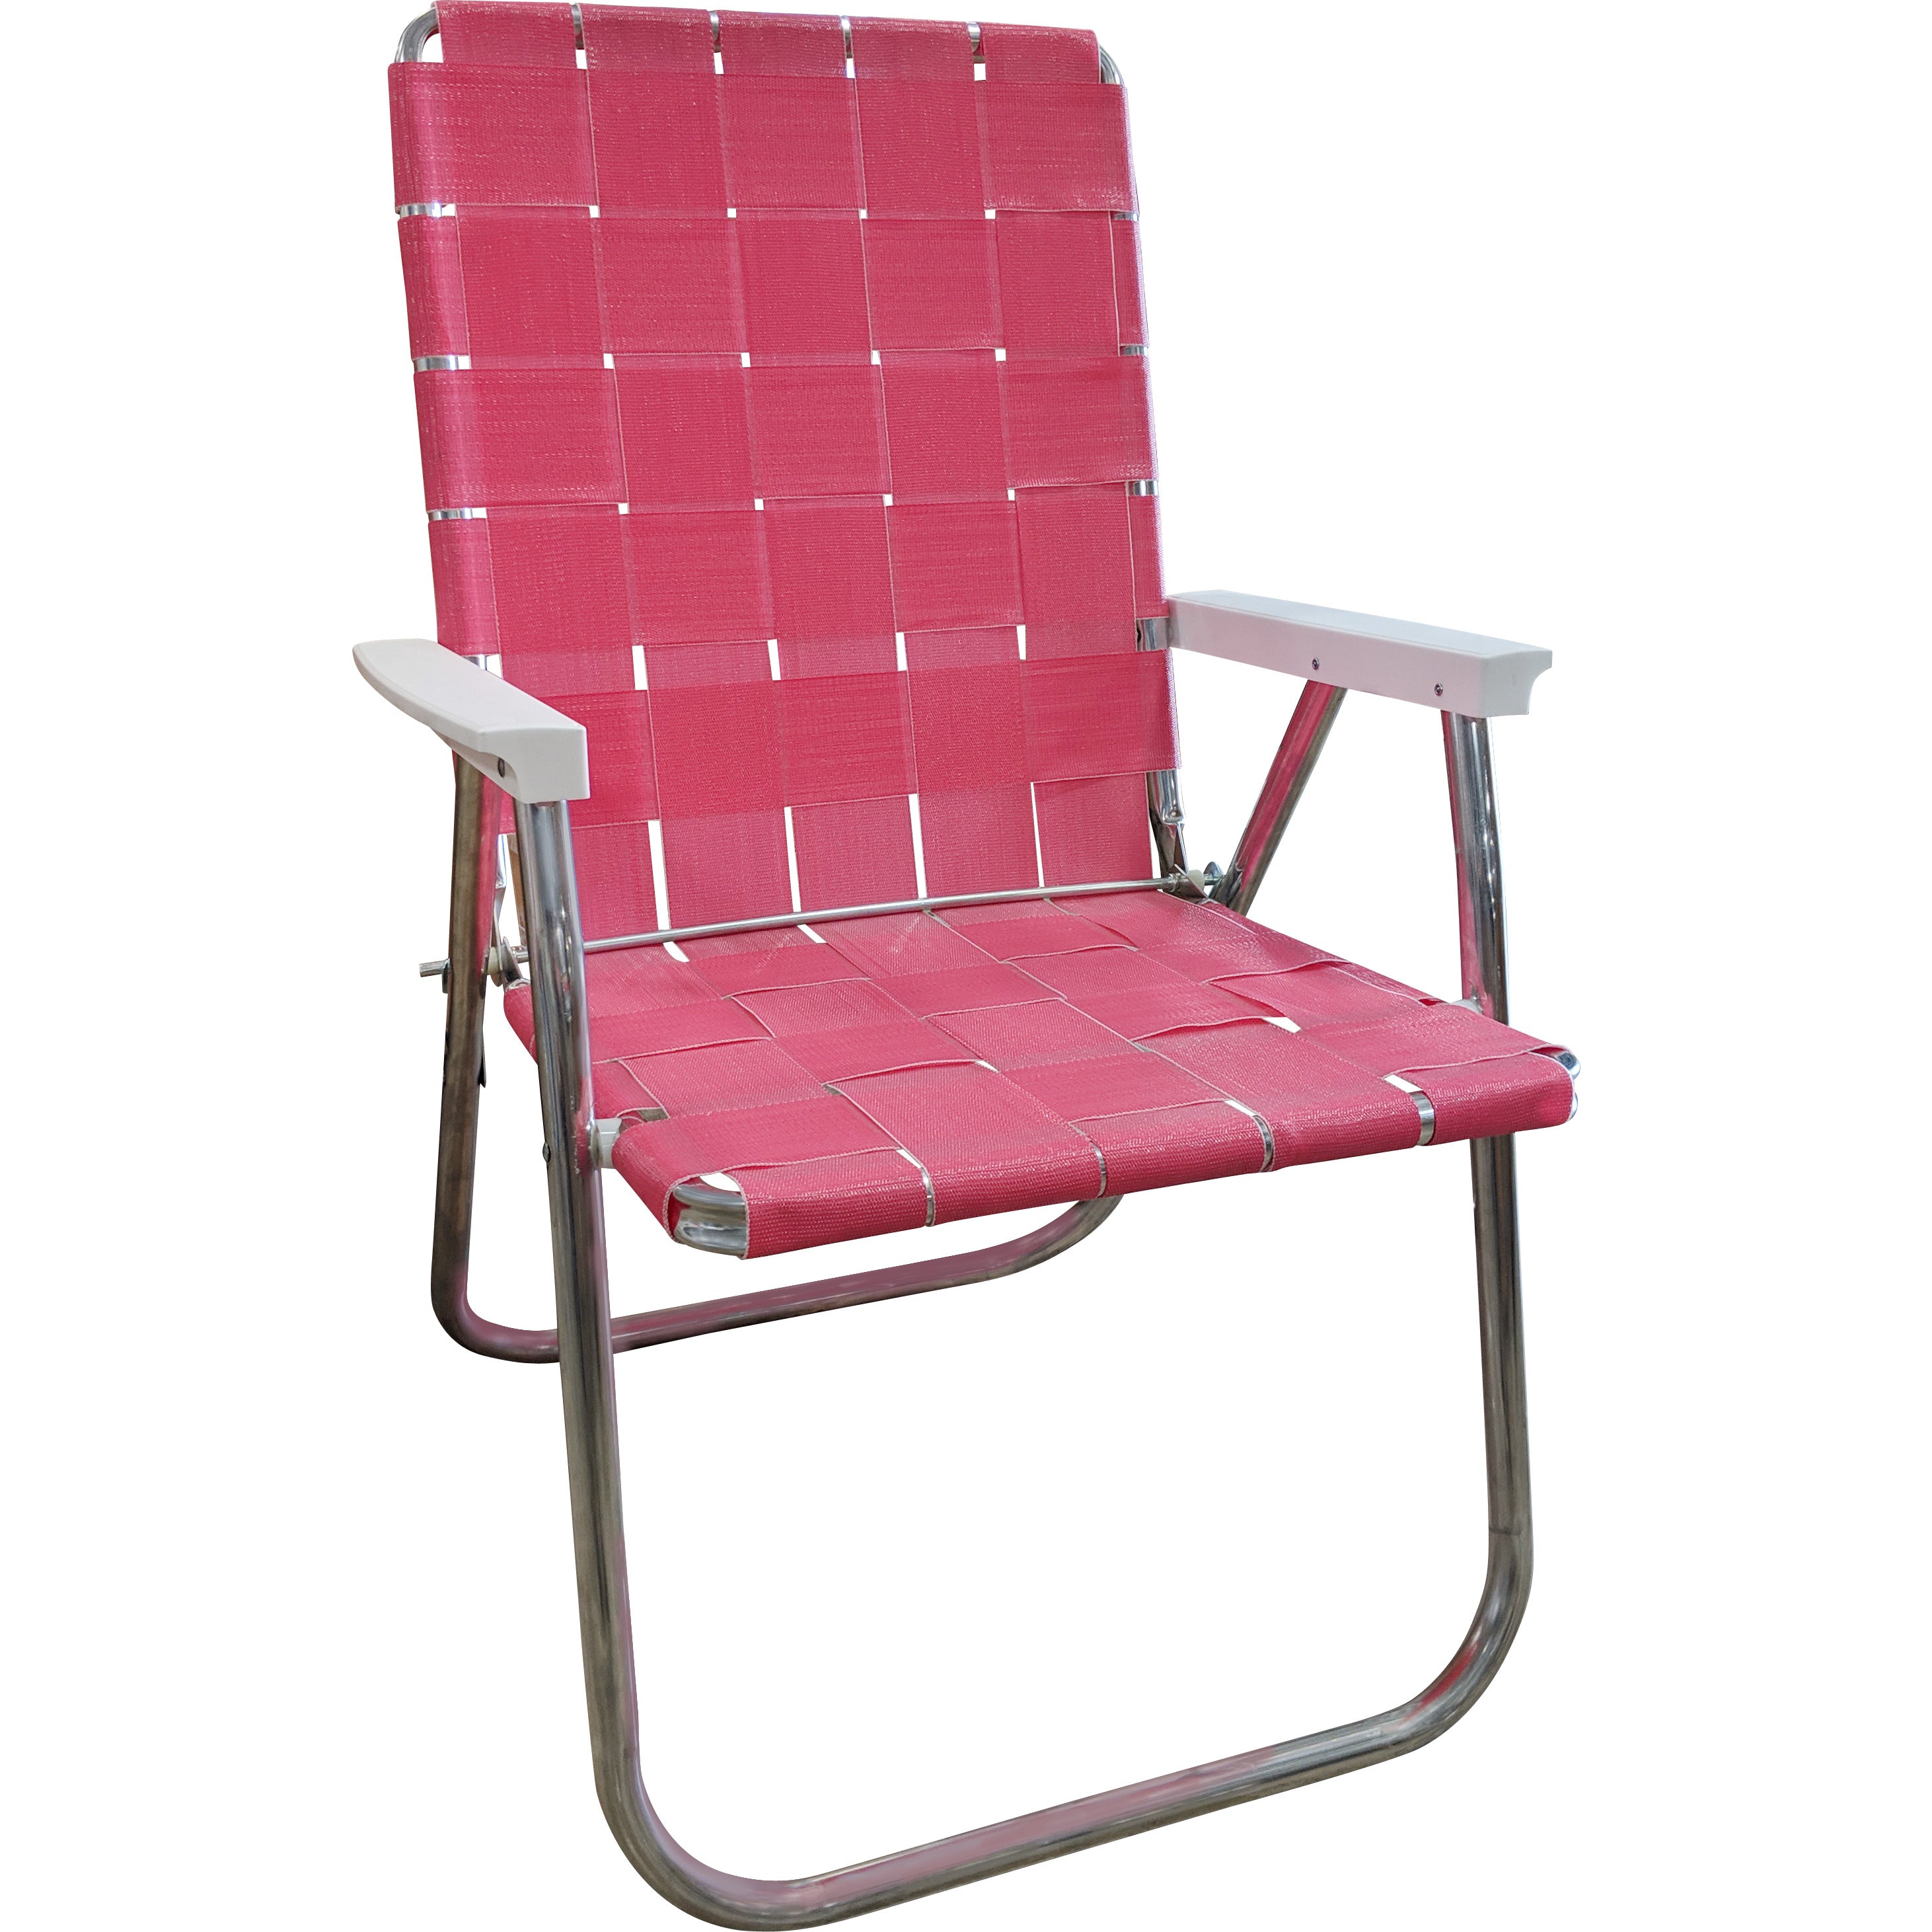 Complete Pink Classic Chair Lawn Chair Usa